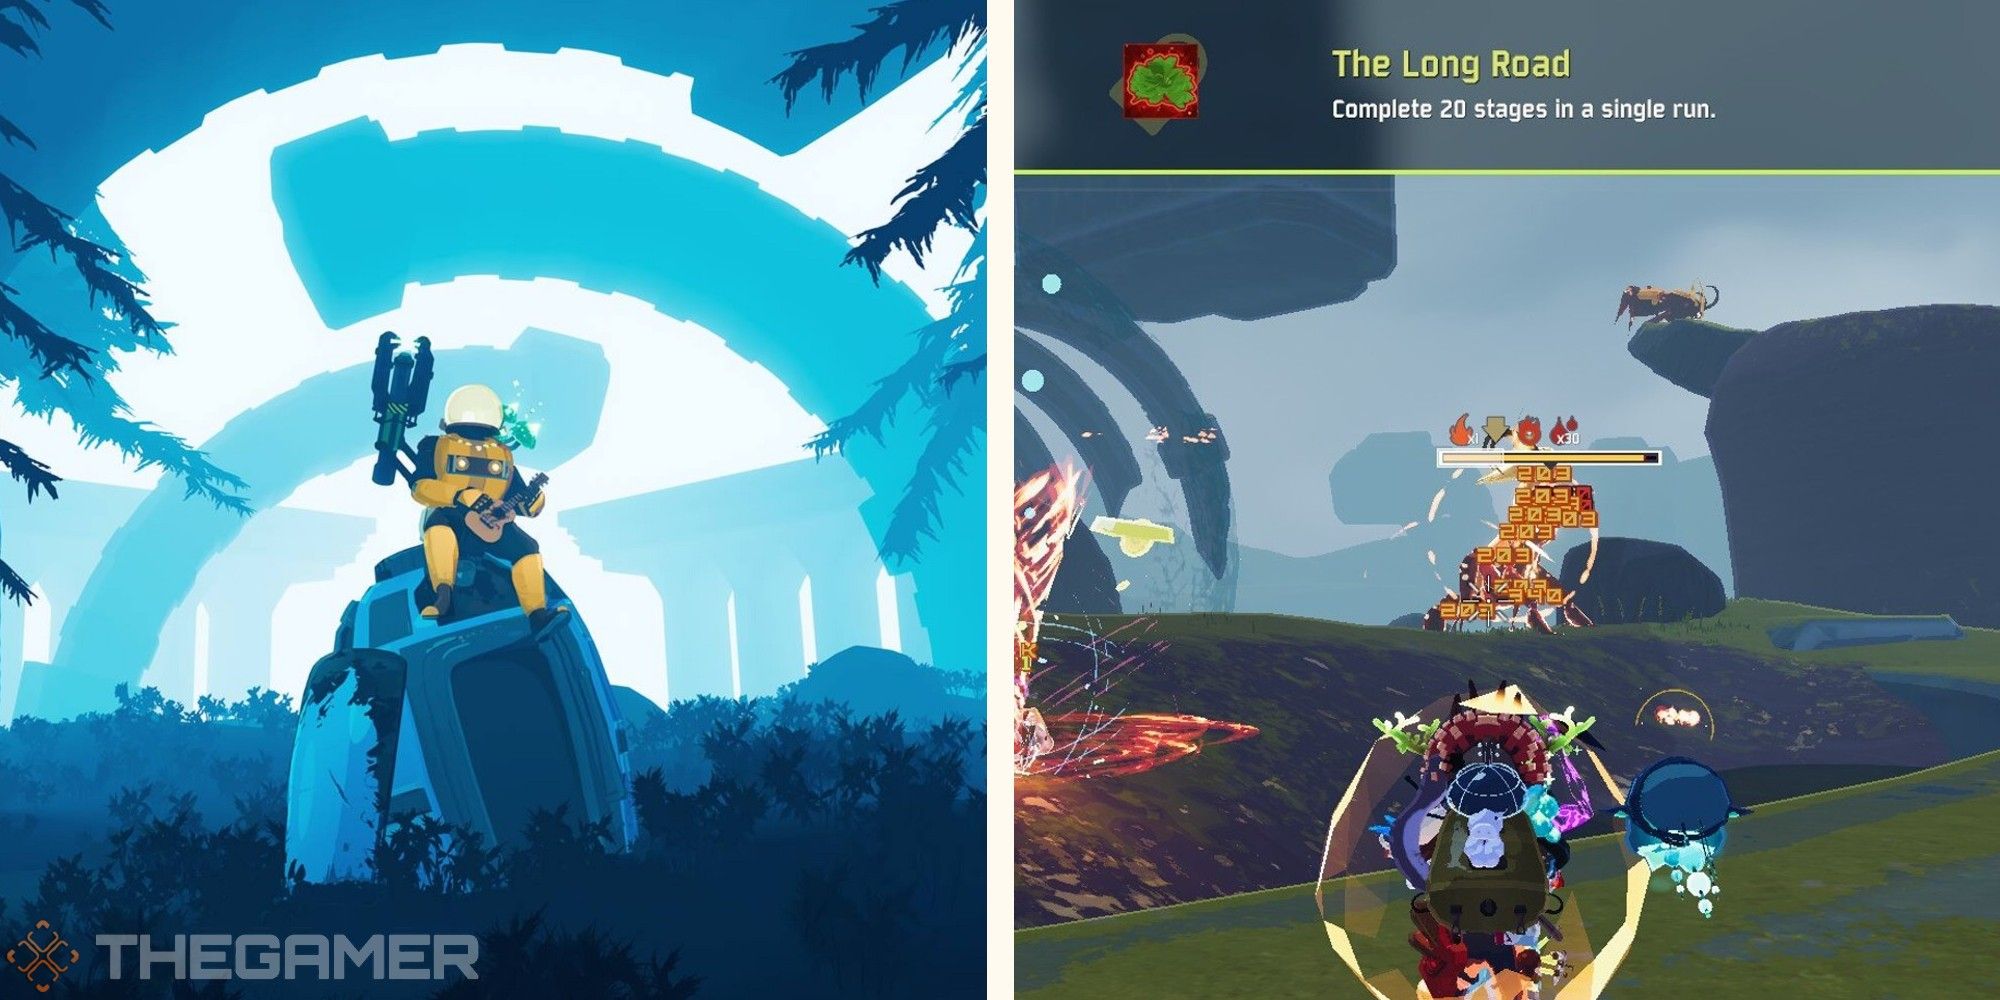 official risk of rain 2 art next to image of player completing the long road challenge